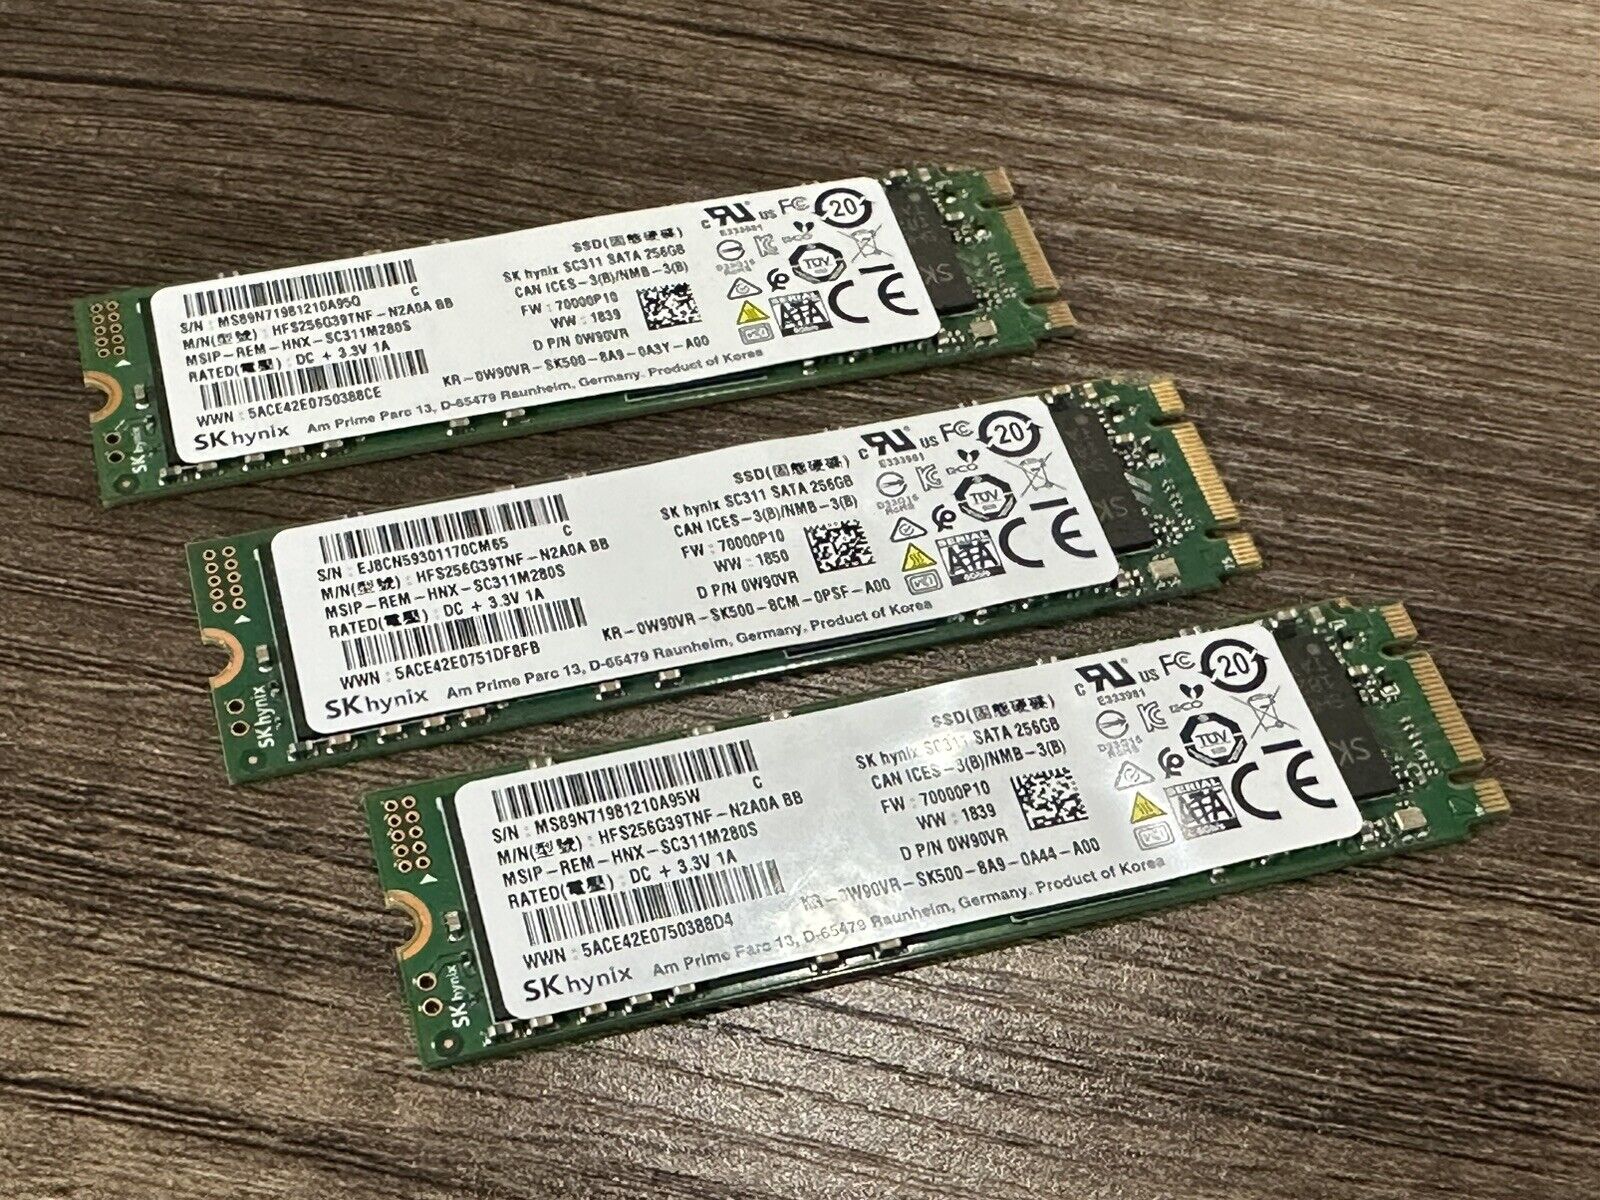 SK HYNIX SC311 SATA 256GB M.2 2280 Solid State Drives (Set of 3)